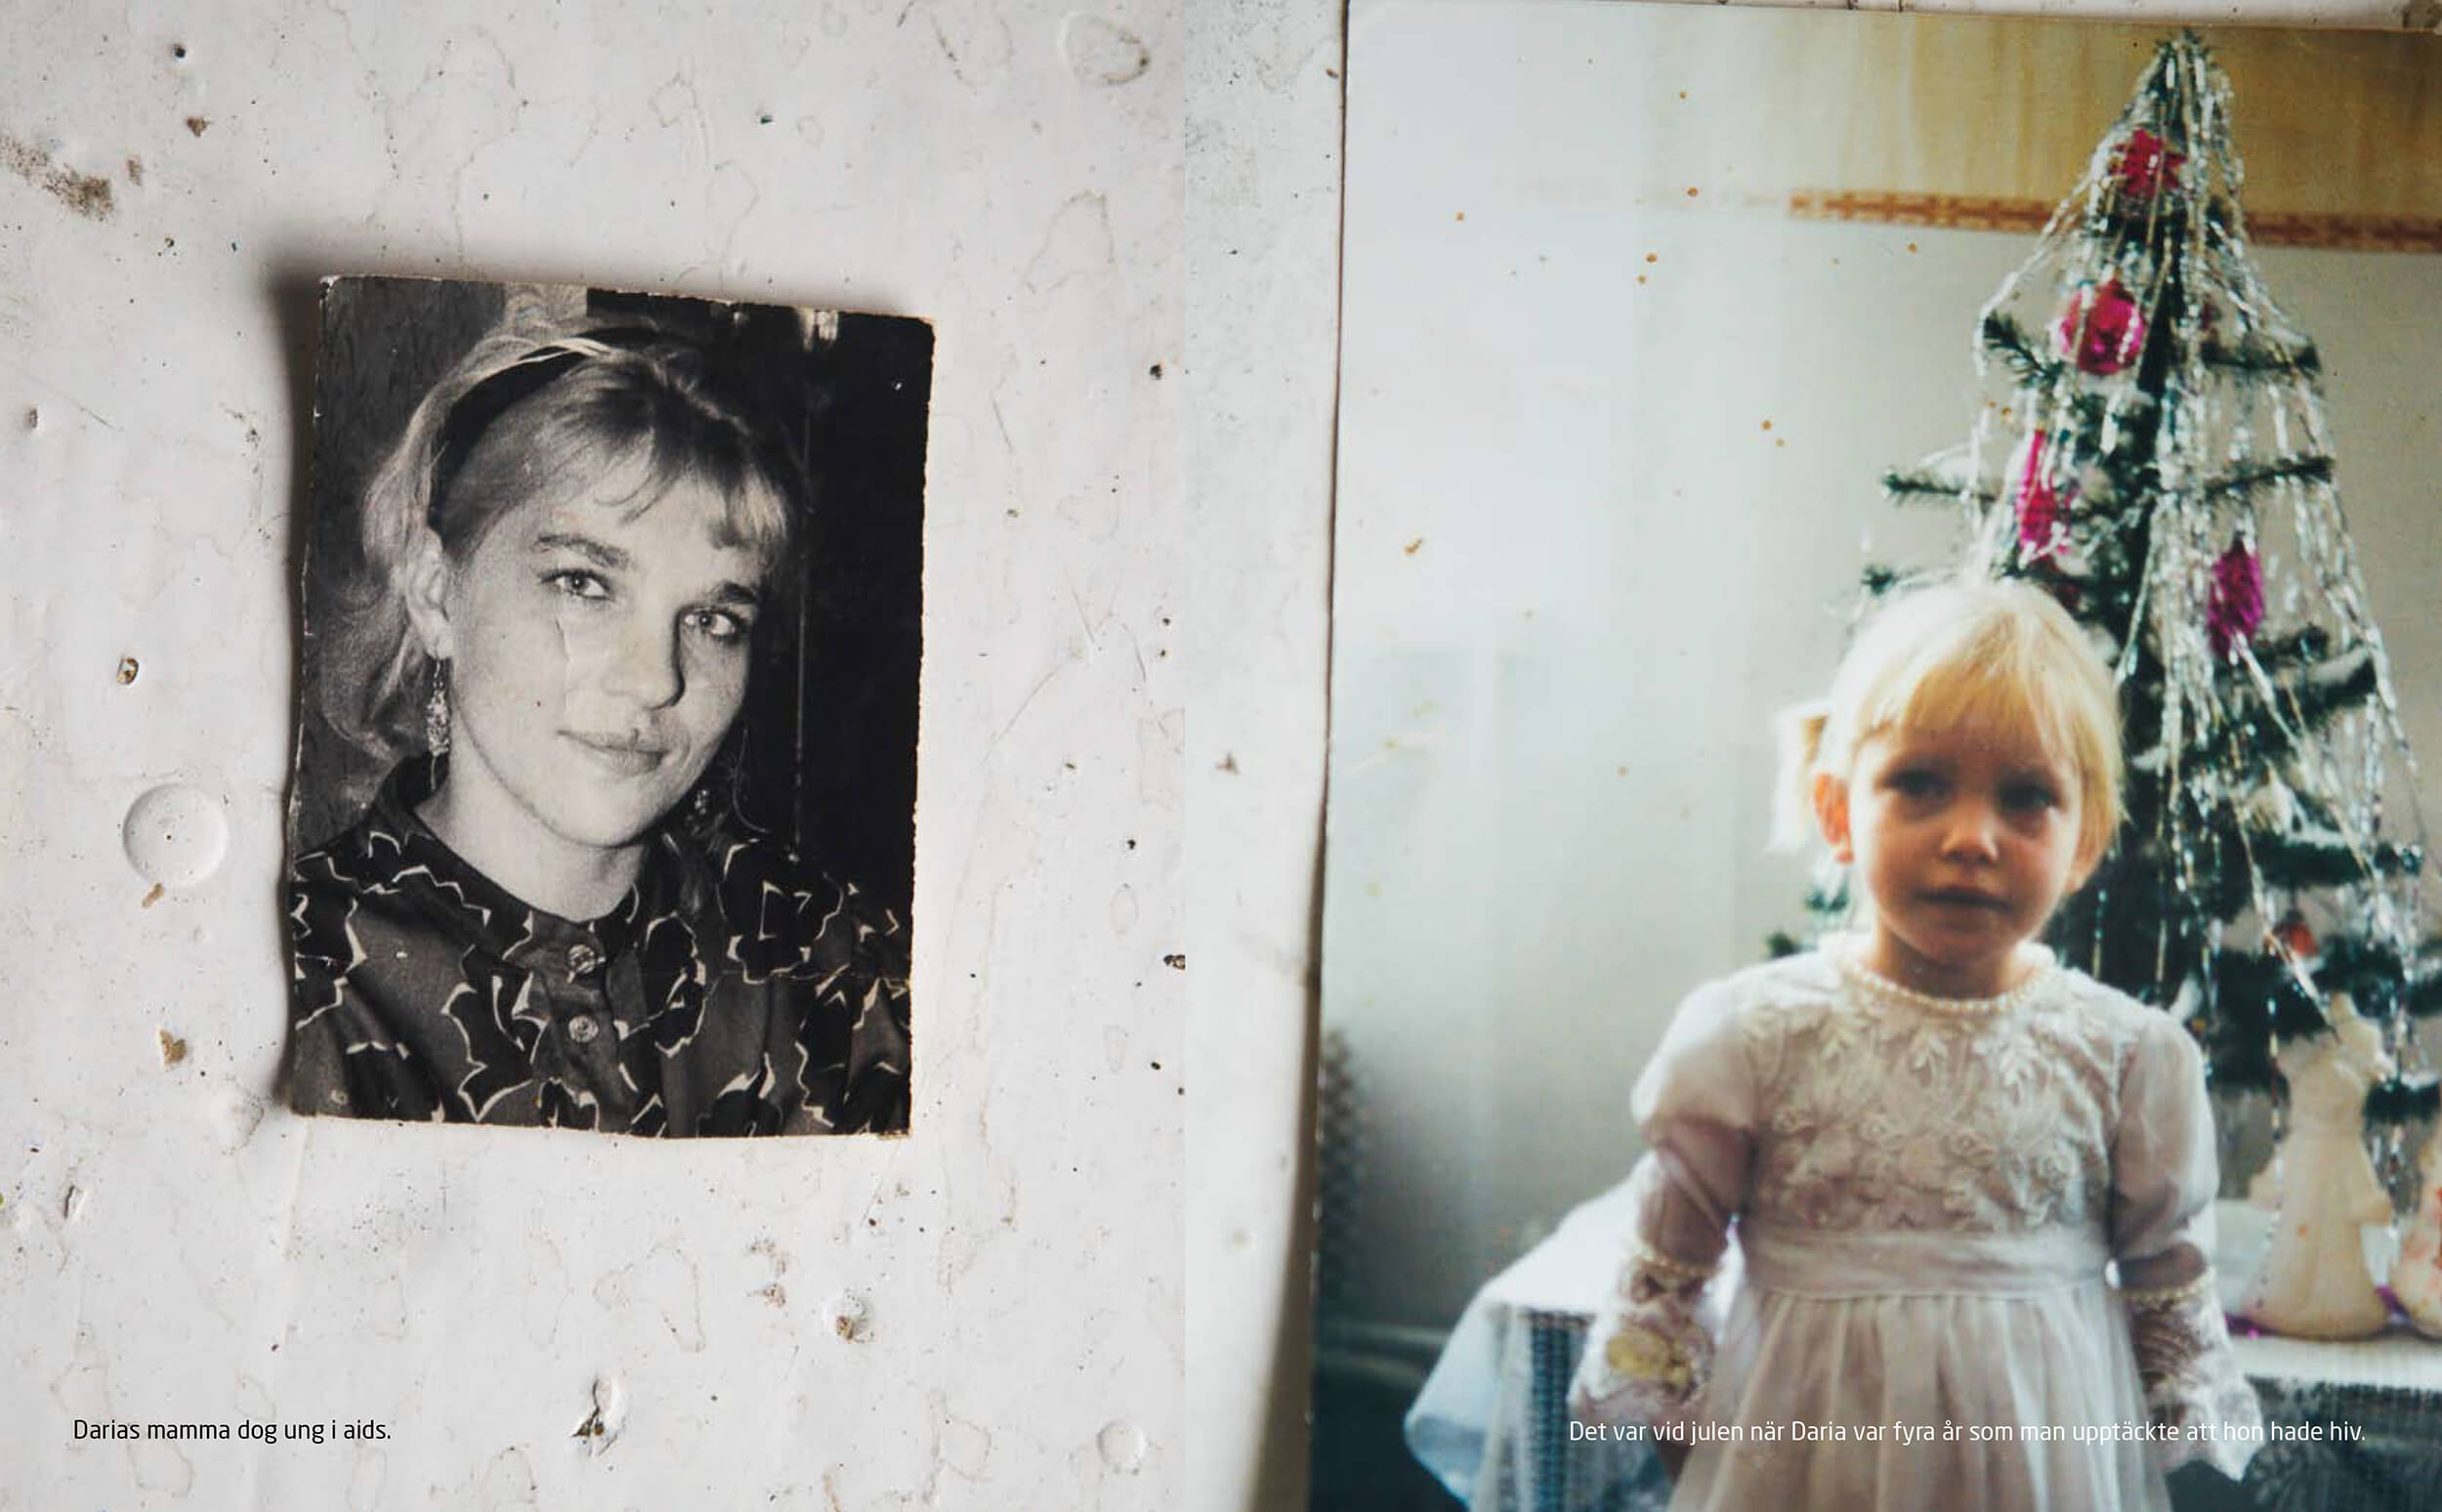  Ukraine. Daria was 4 years old when both her two parents died in Aids. 